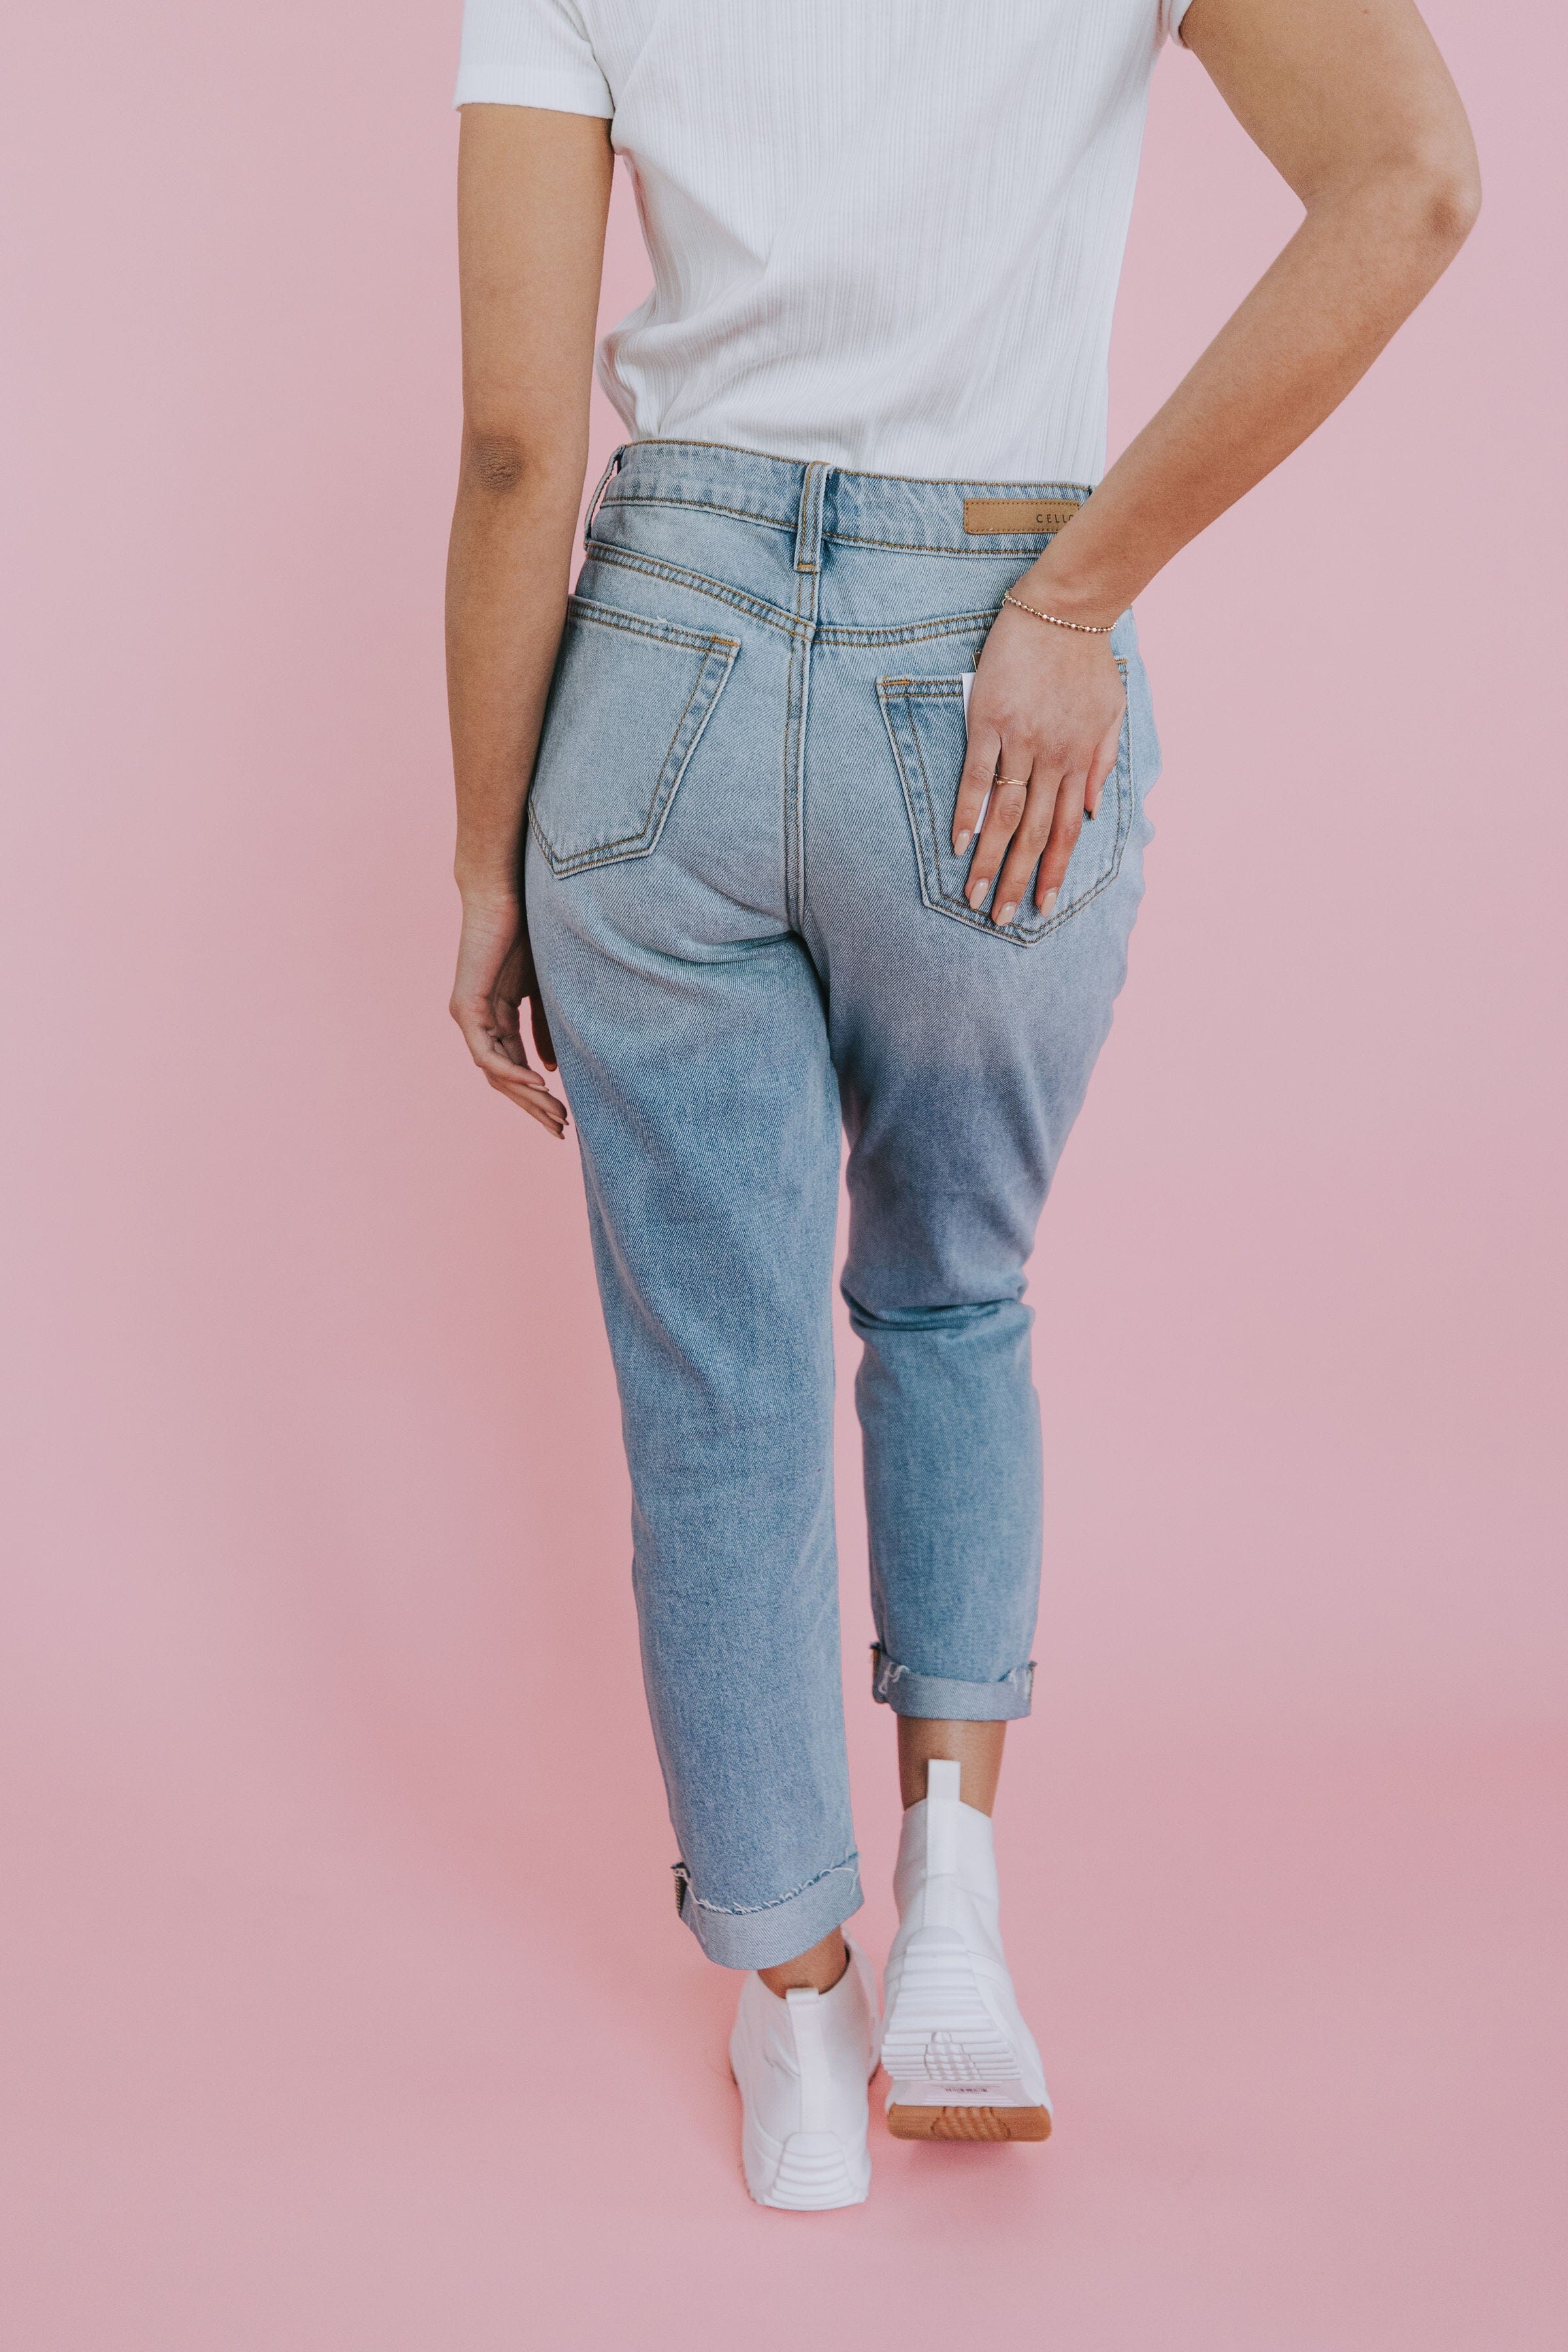 Try Your Best Jeans